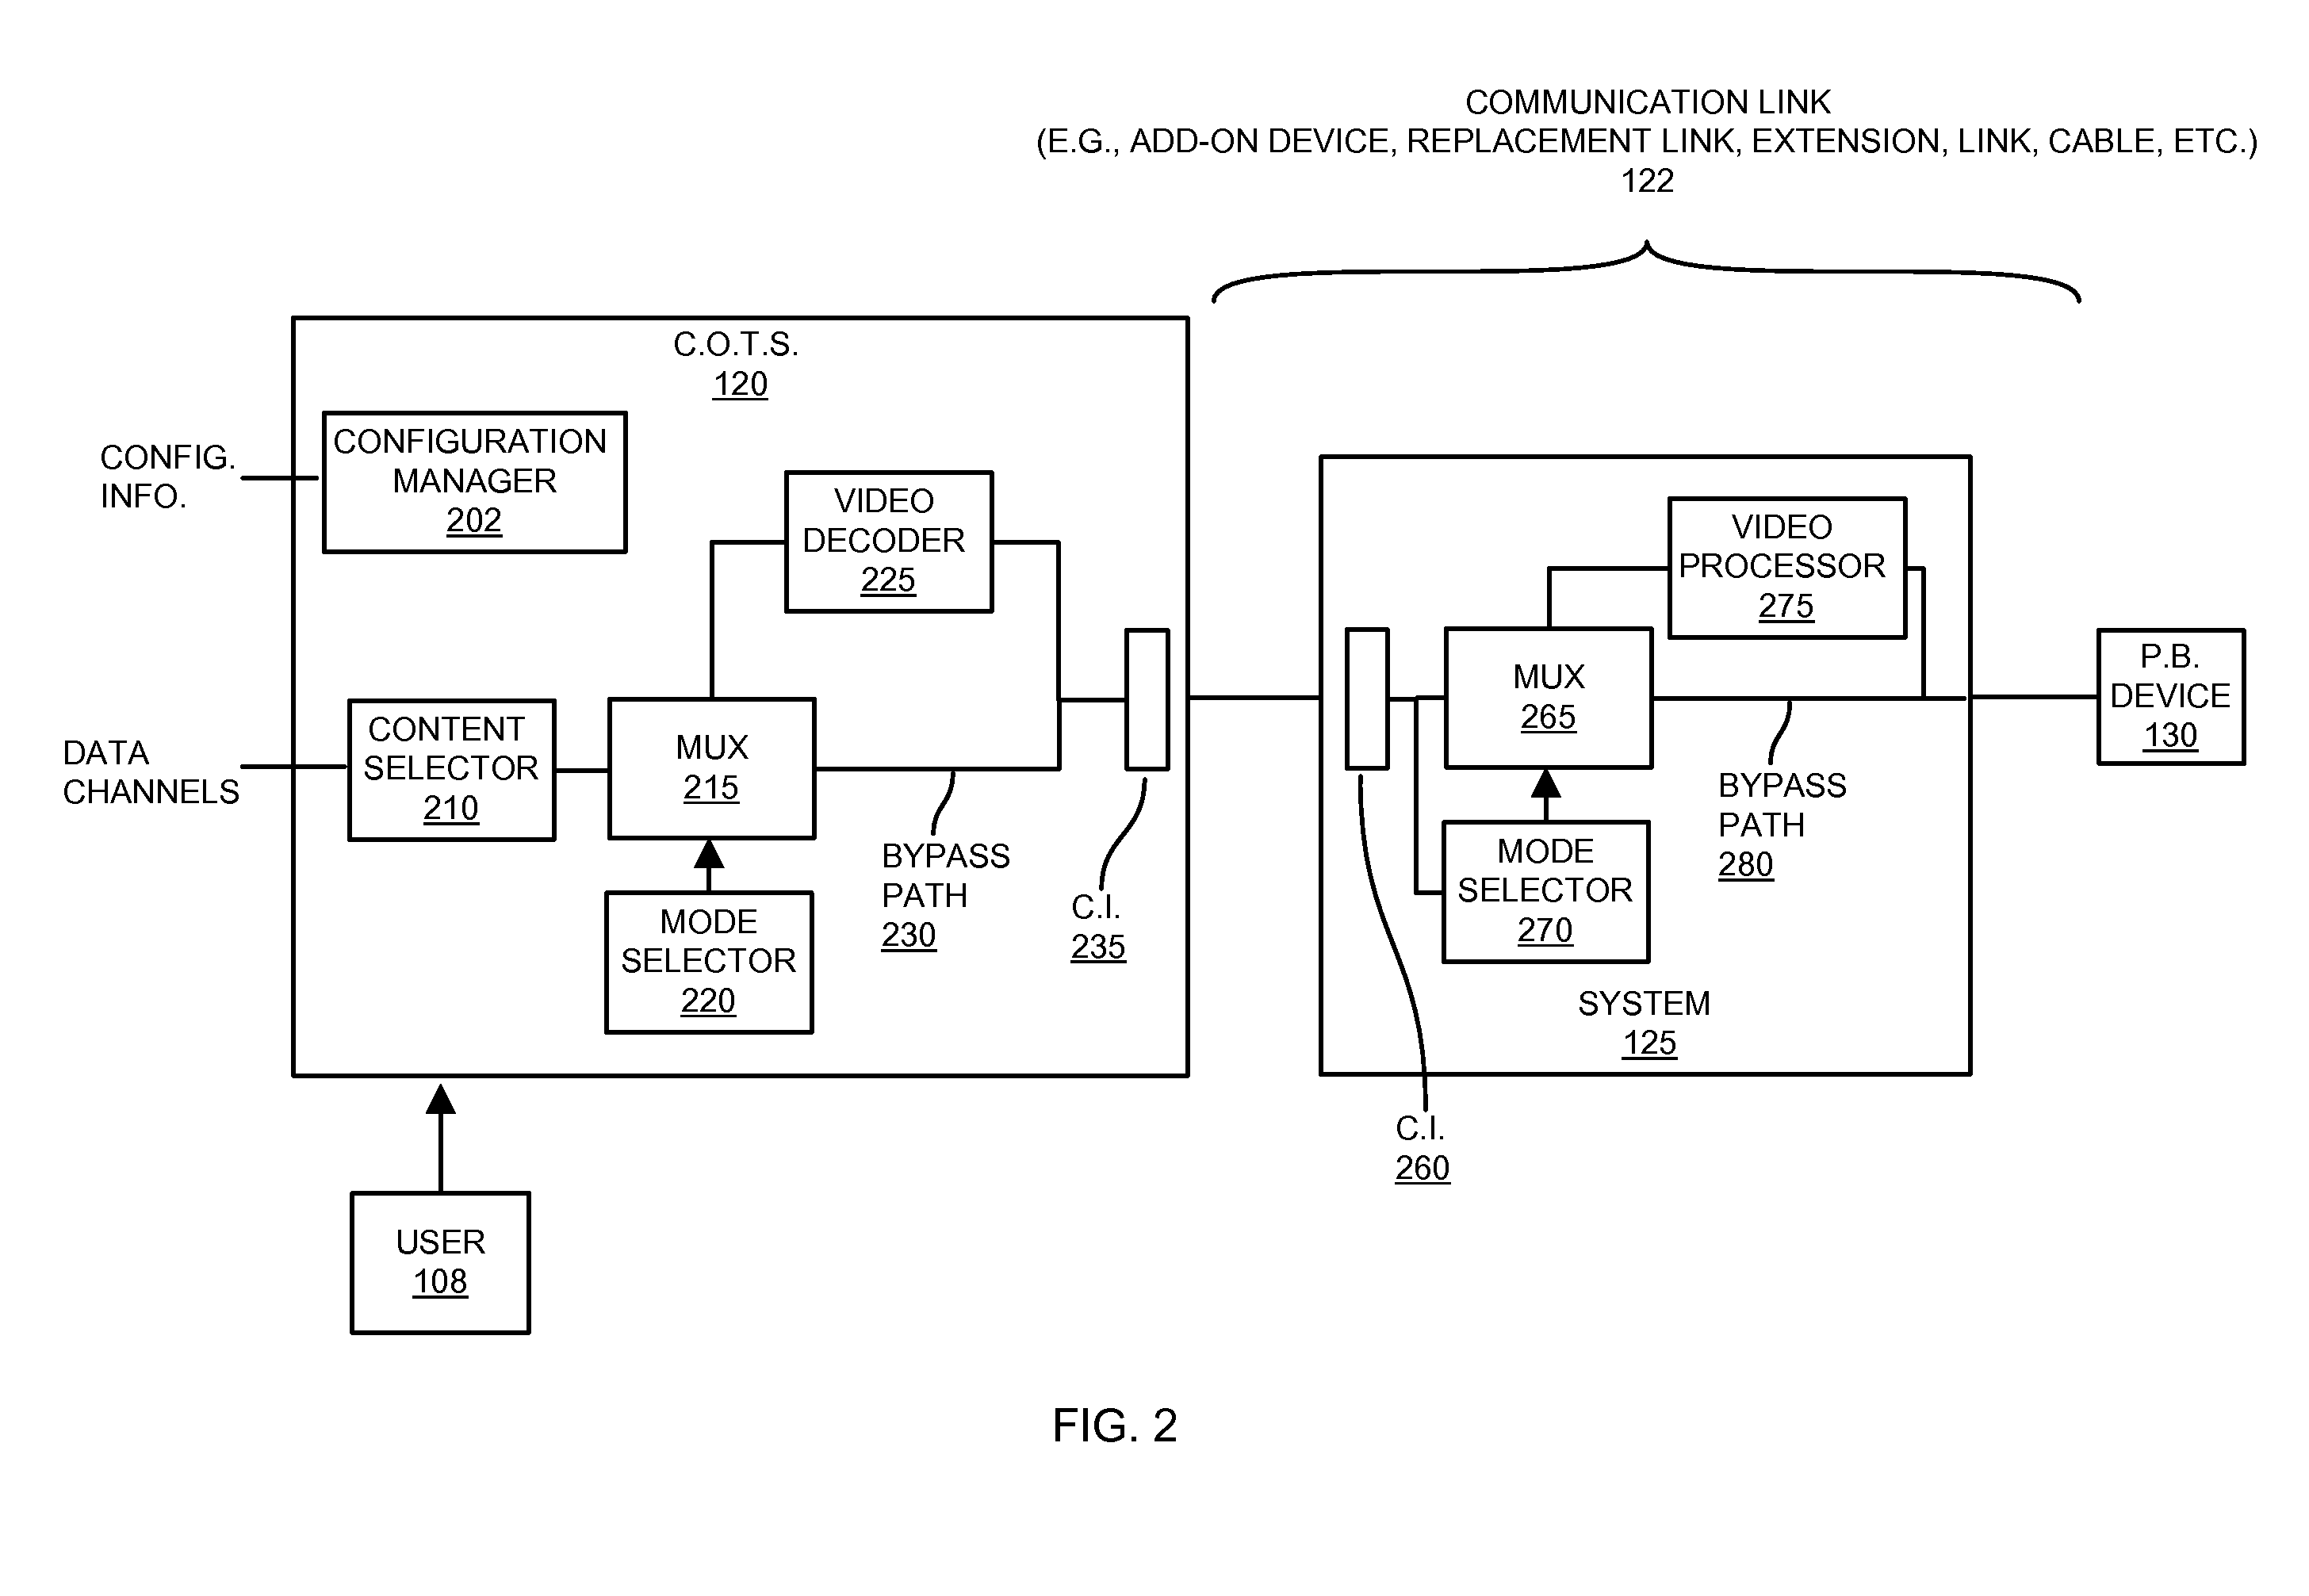 Enhanced video processing functionality in auxiliary system